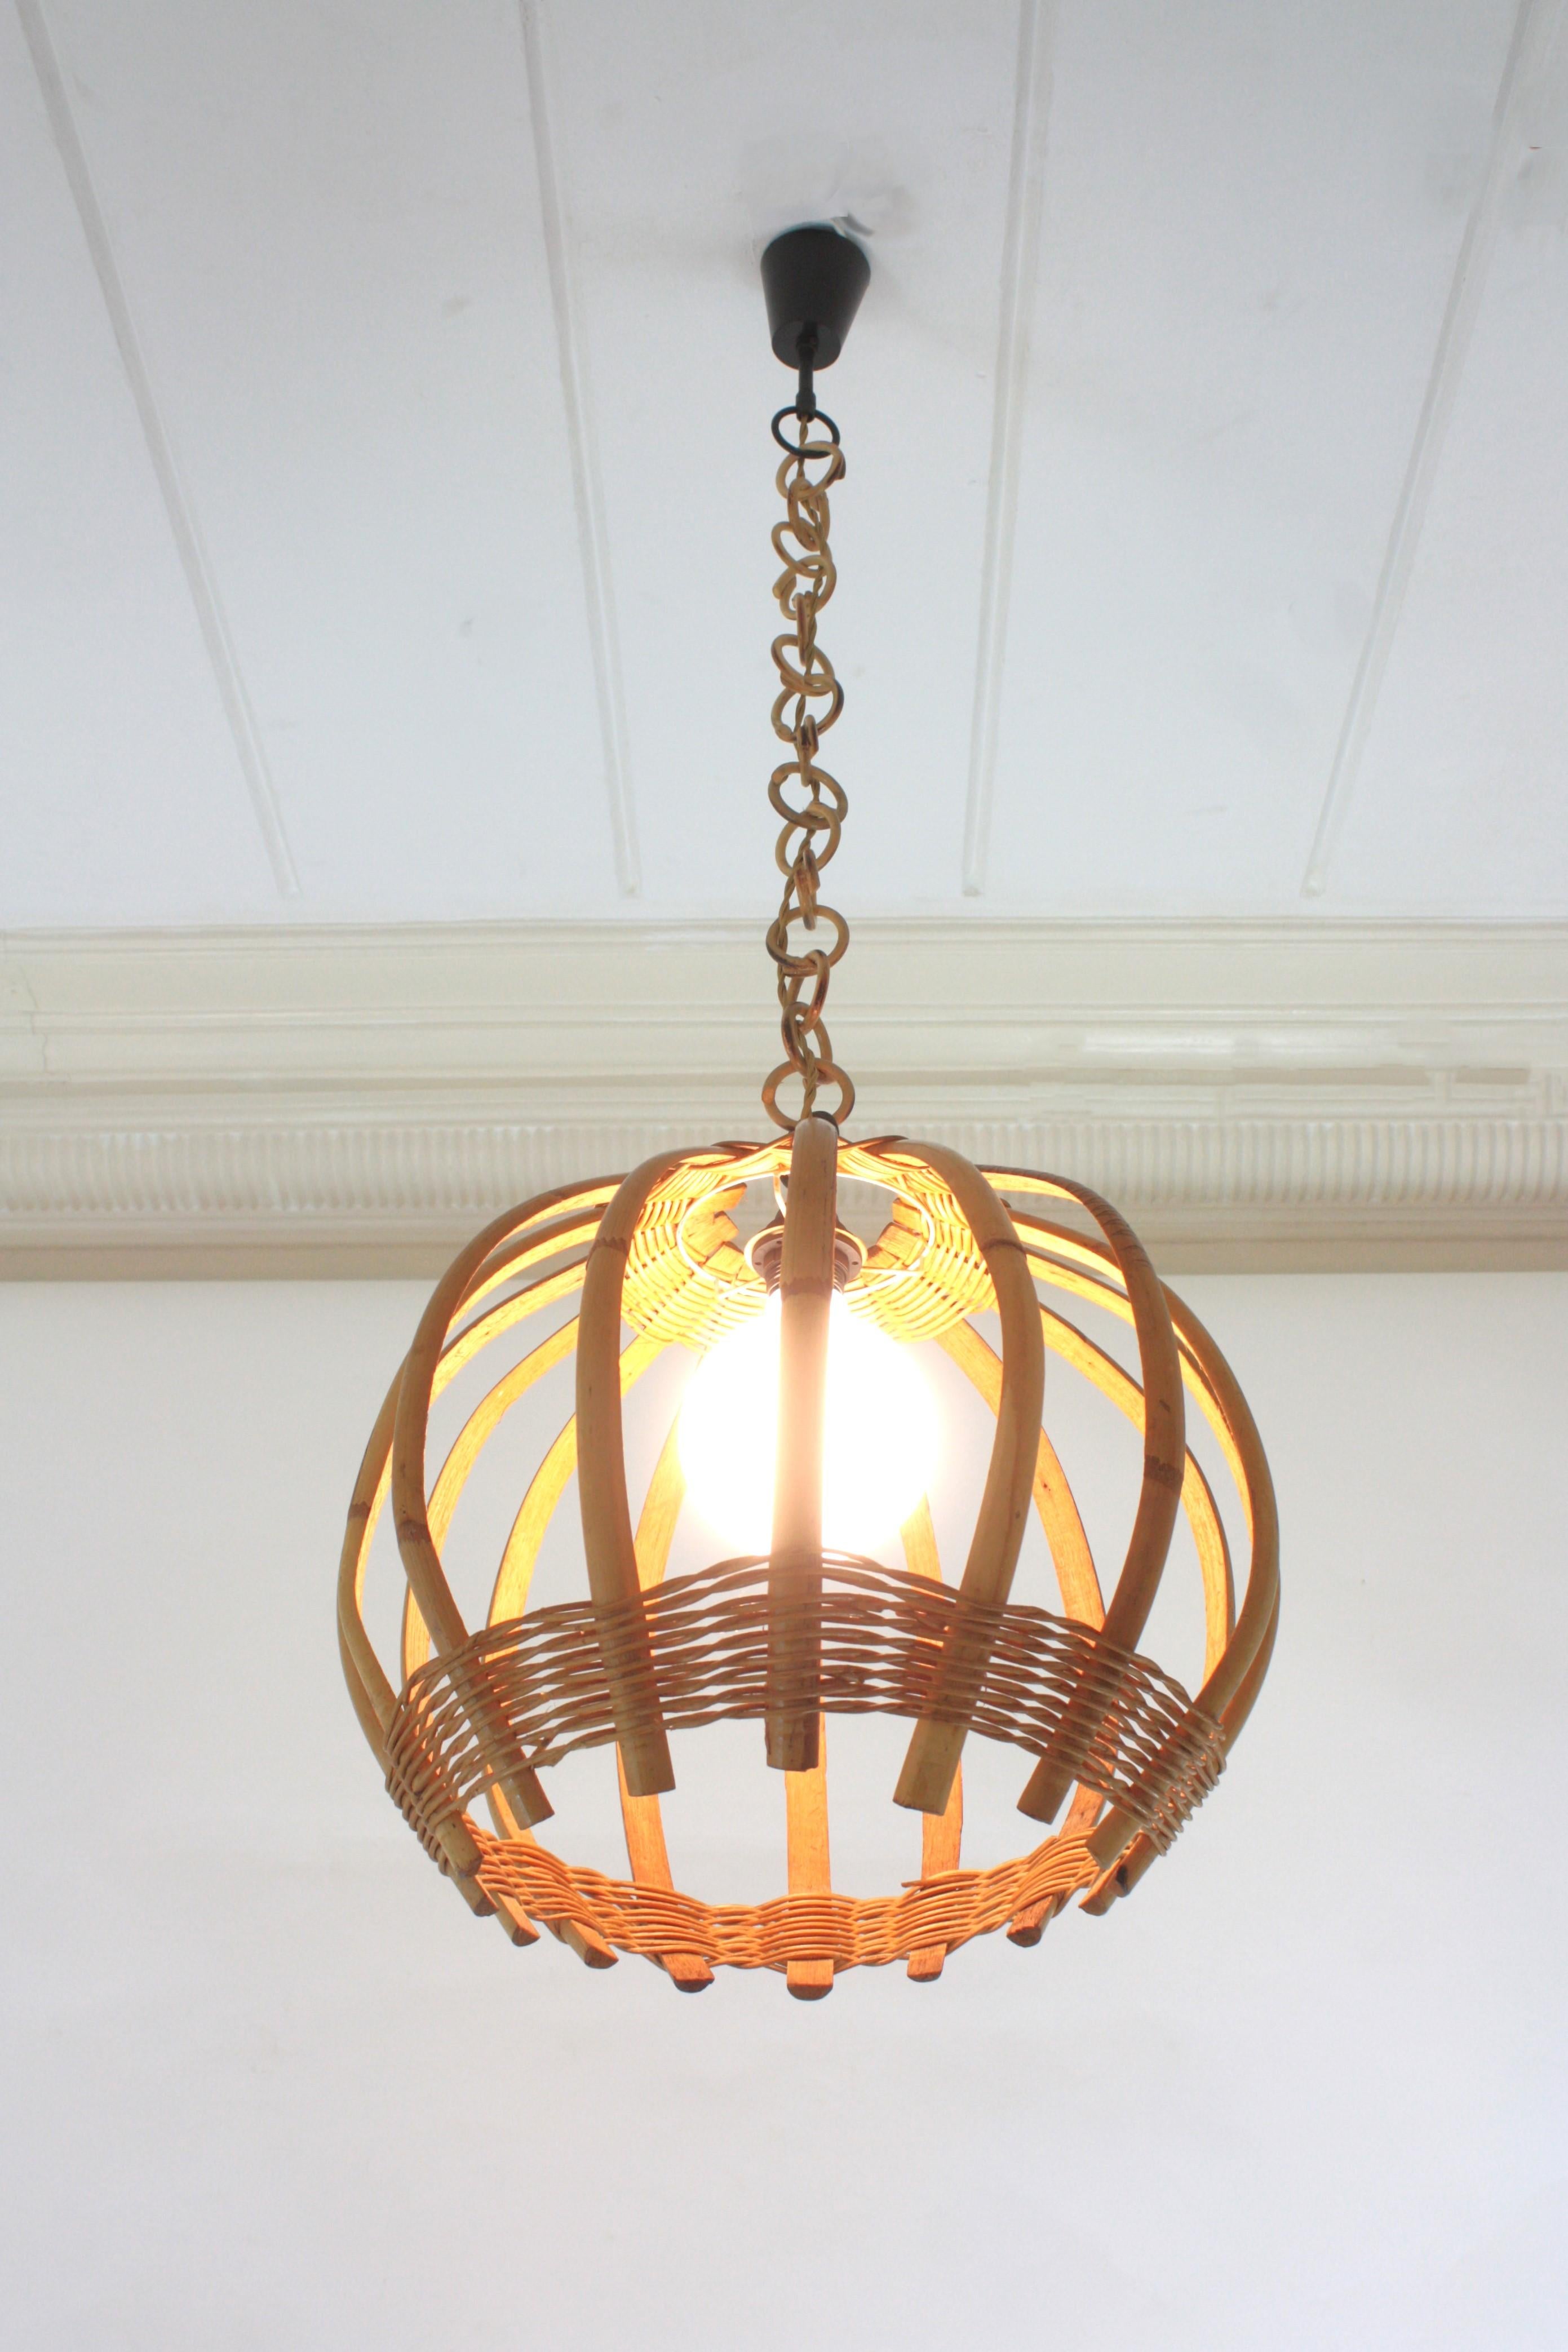 1960s Large Bamboo Rattan Round Shaped Pendant Light with Woven Wicker Detail For Sale 2